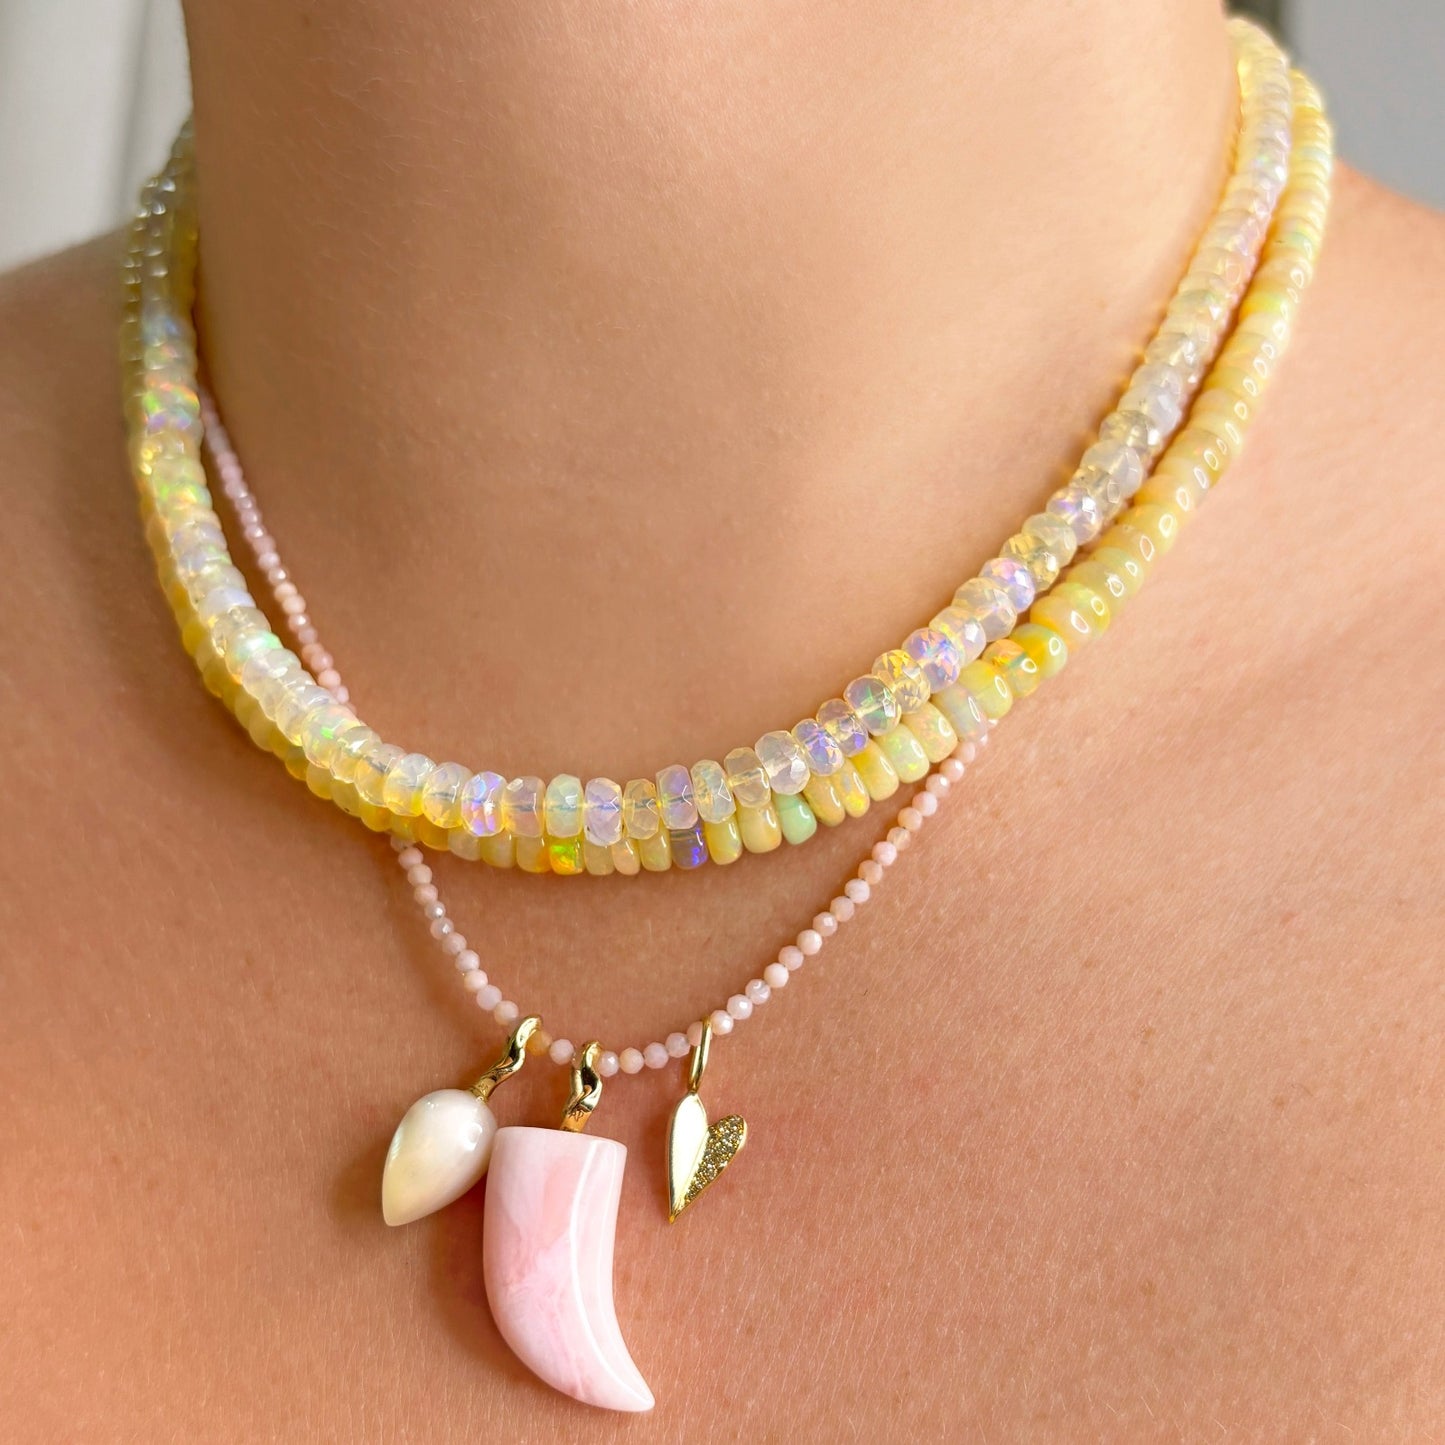 Shimmering beaded necklaces made of 2mm faceted opals in shades of light pink. Styled on a neck layered with a small folded heart charm with pave, acorn drop charm, and horn charm.